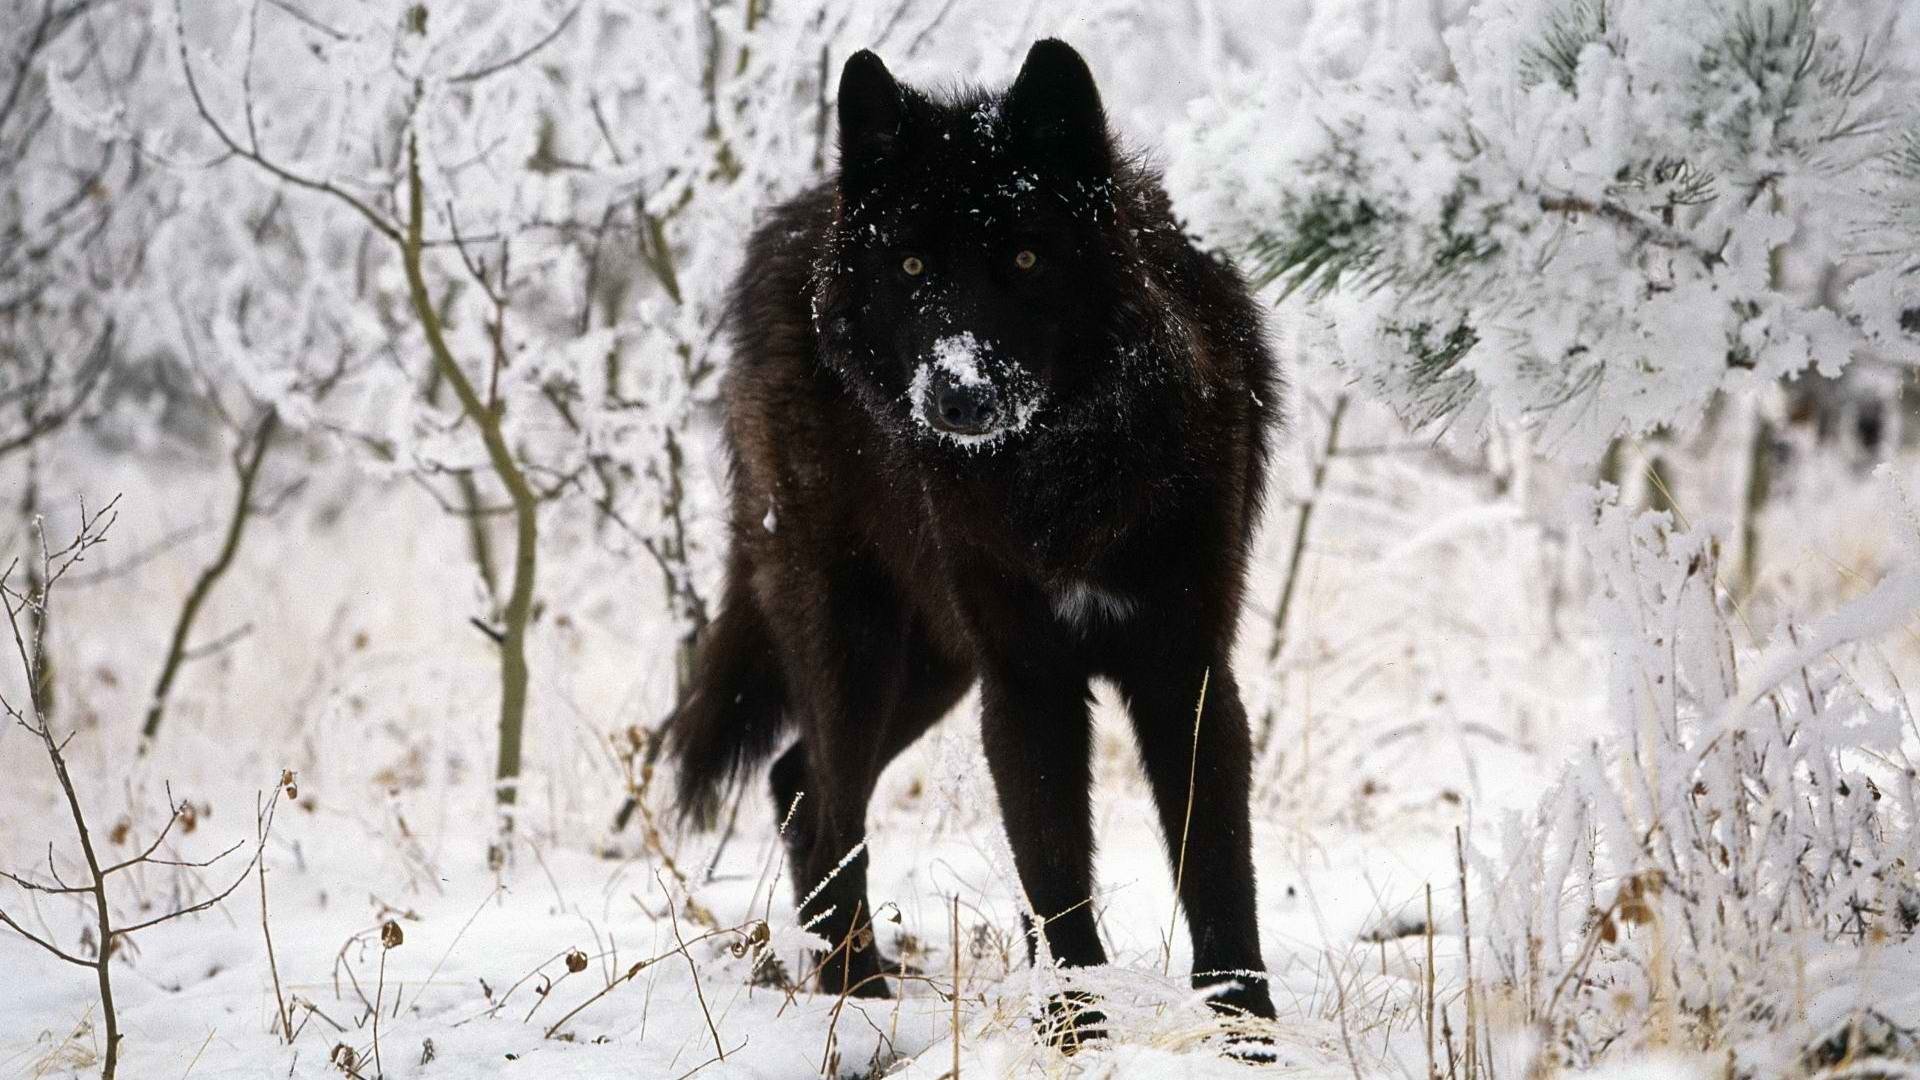 Black wolf HD Wallpaper | Background Image | 1920x1080 ...
 New World Black Wolves